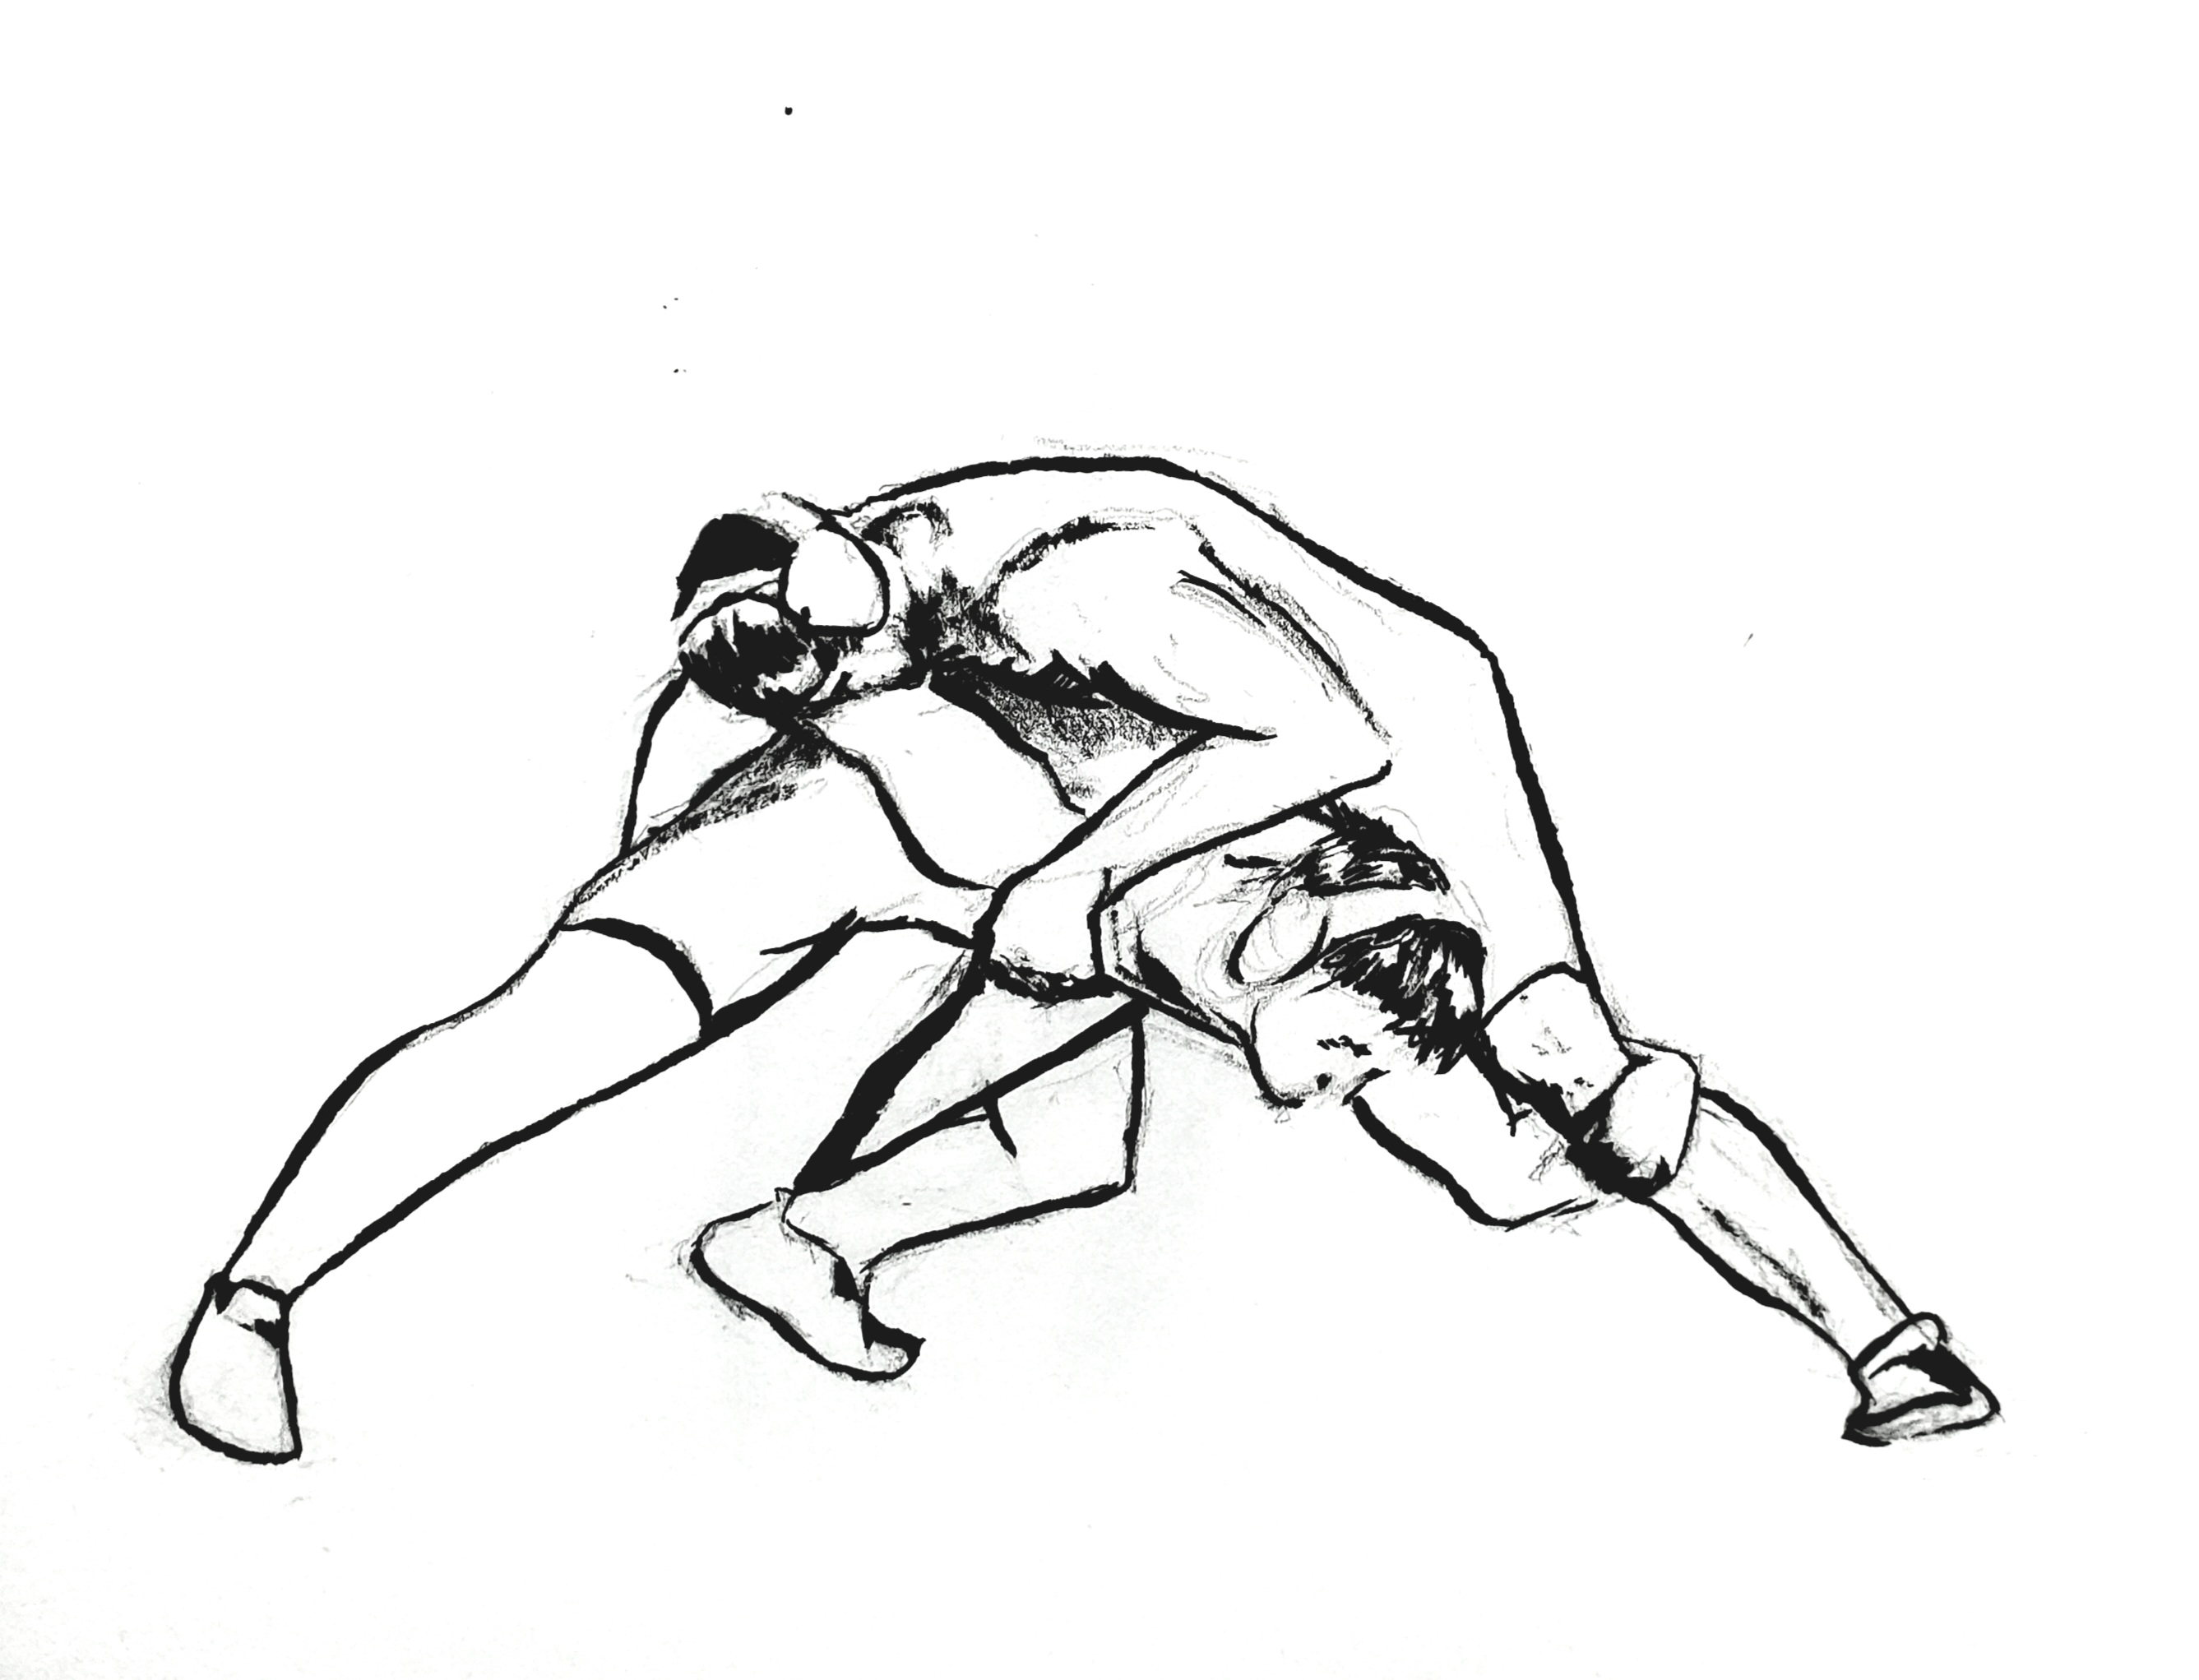 A drawing of wrestlers